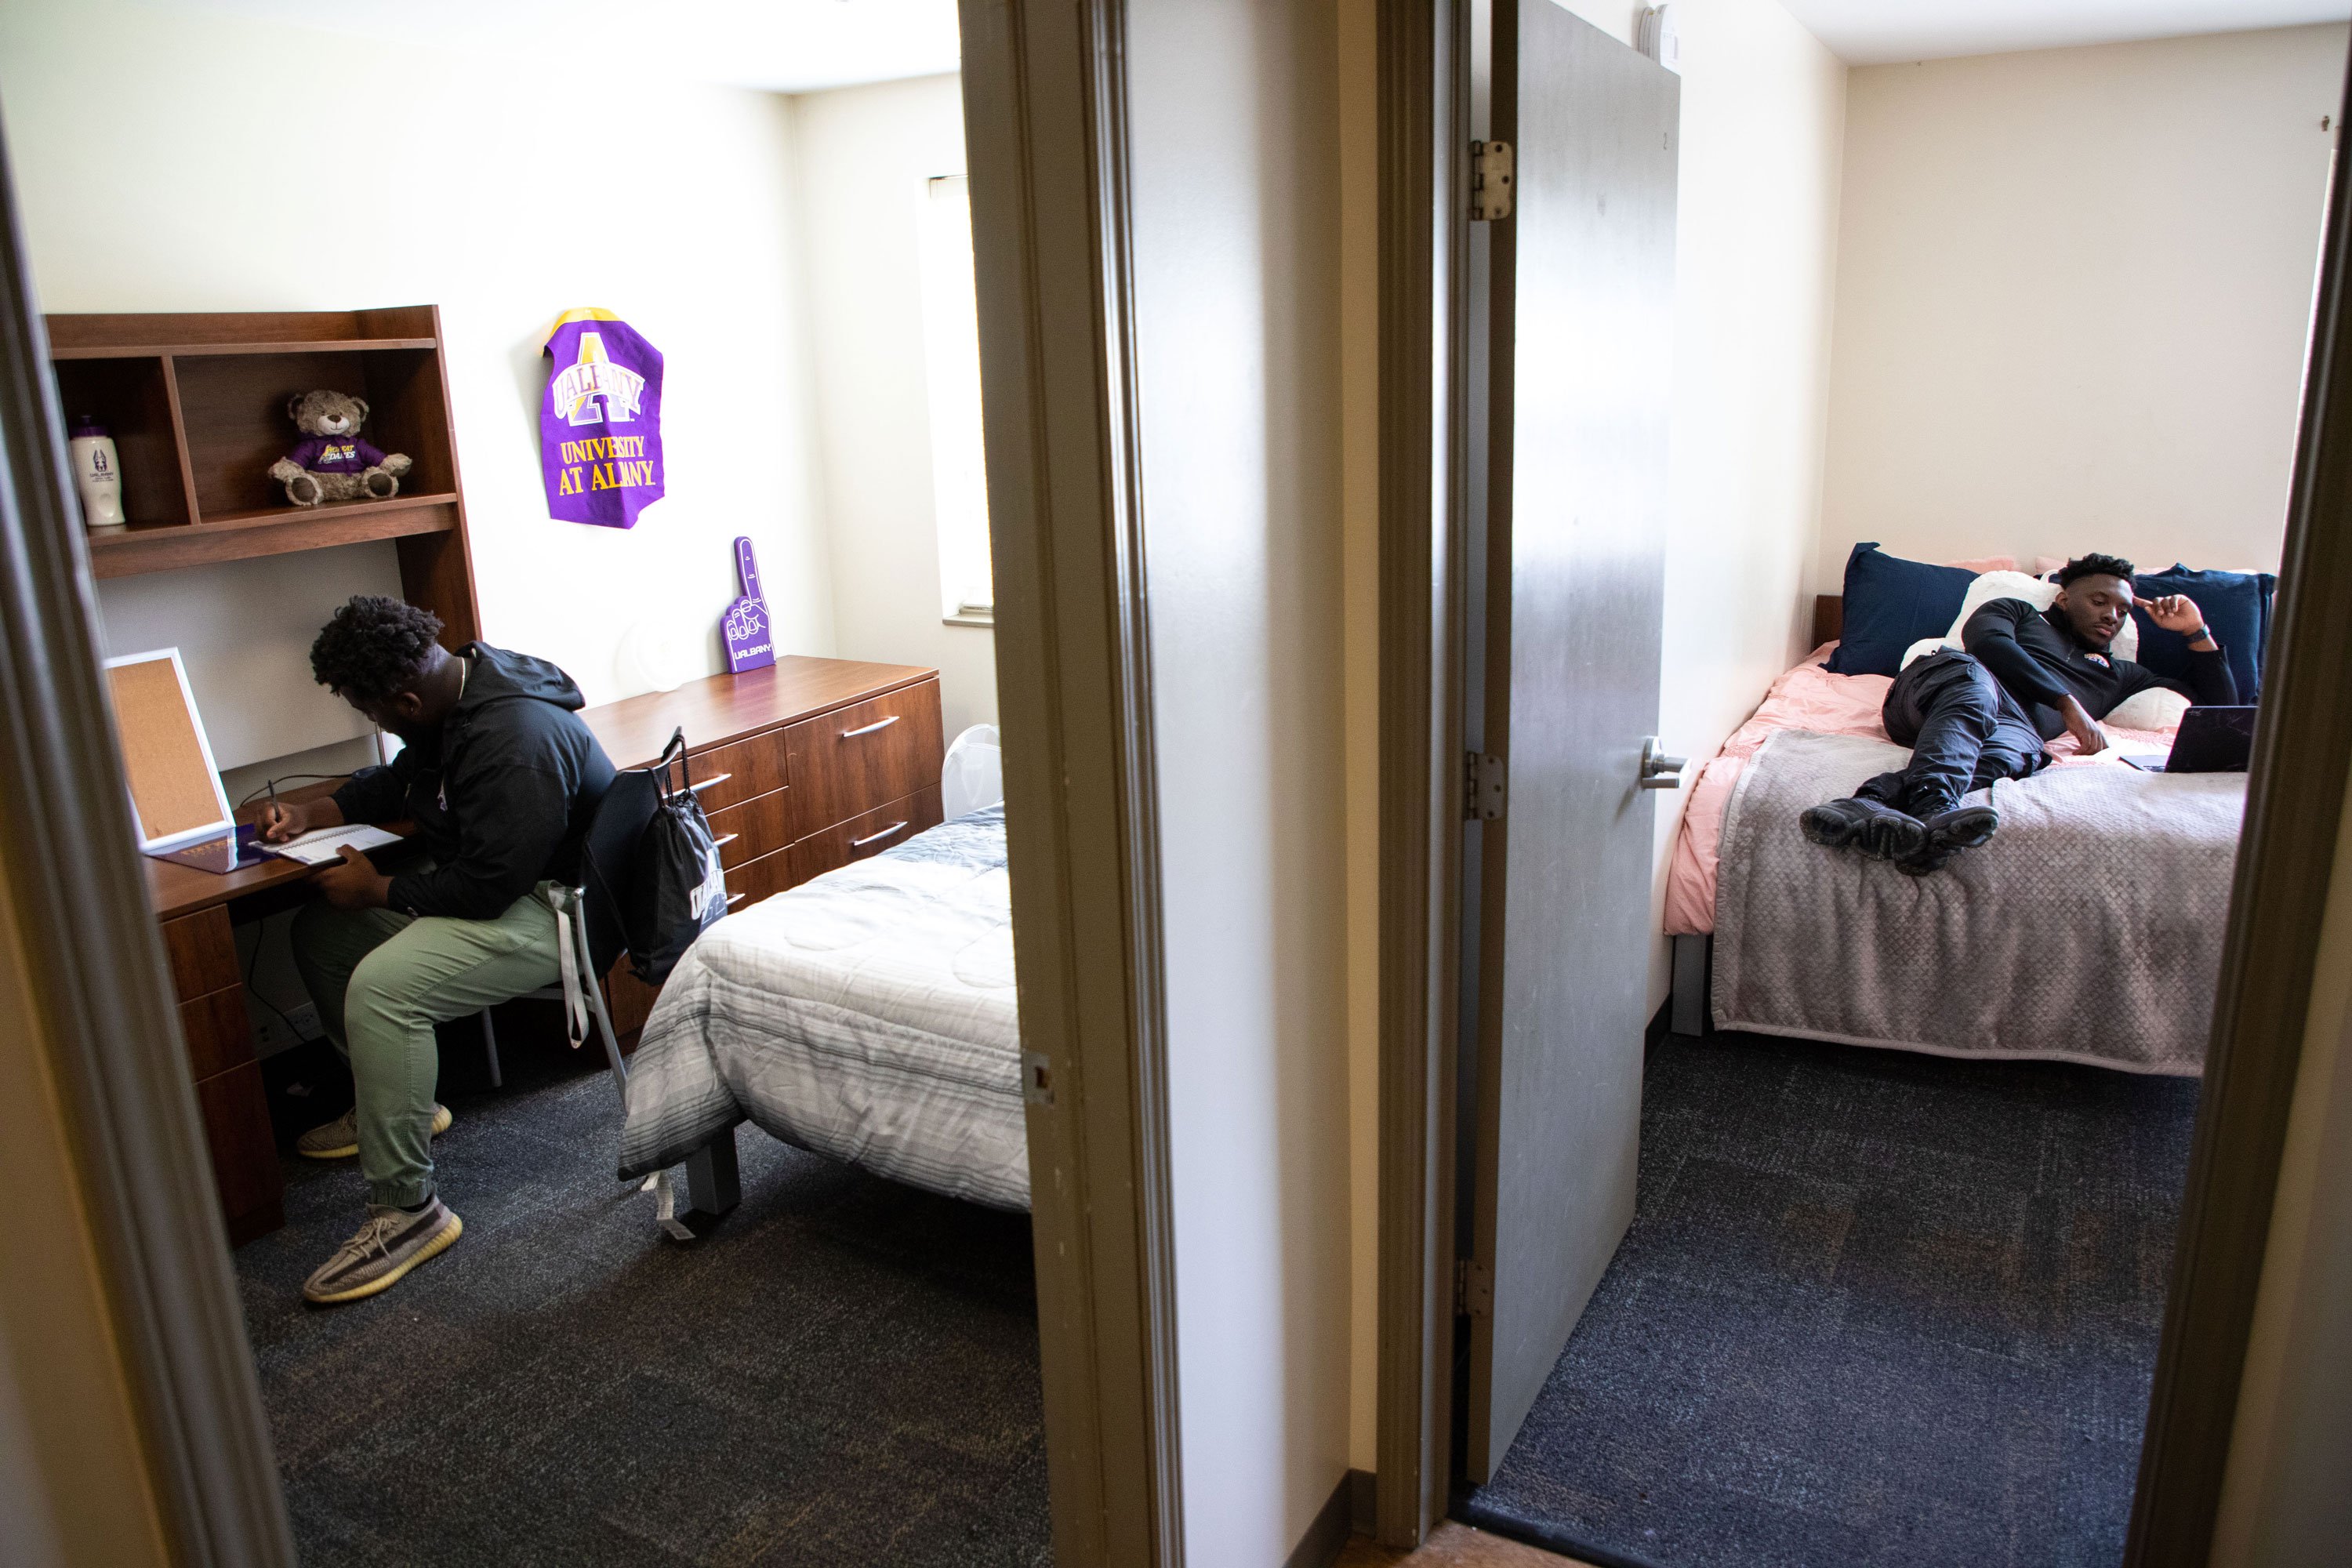 Two doors open into separate bedrooms. In the bedroom to the left, a student sits at a desk and writes in a notebook. In the bedroom to the right, a student lays on the bed and watches something on his laptop.